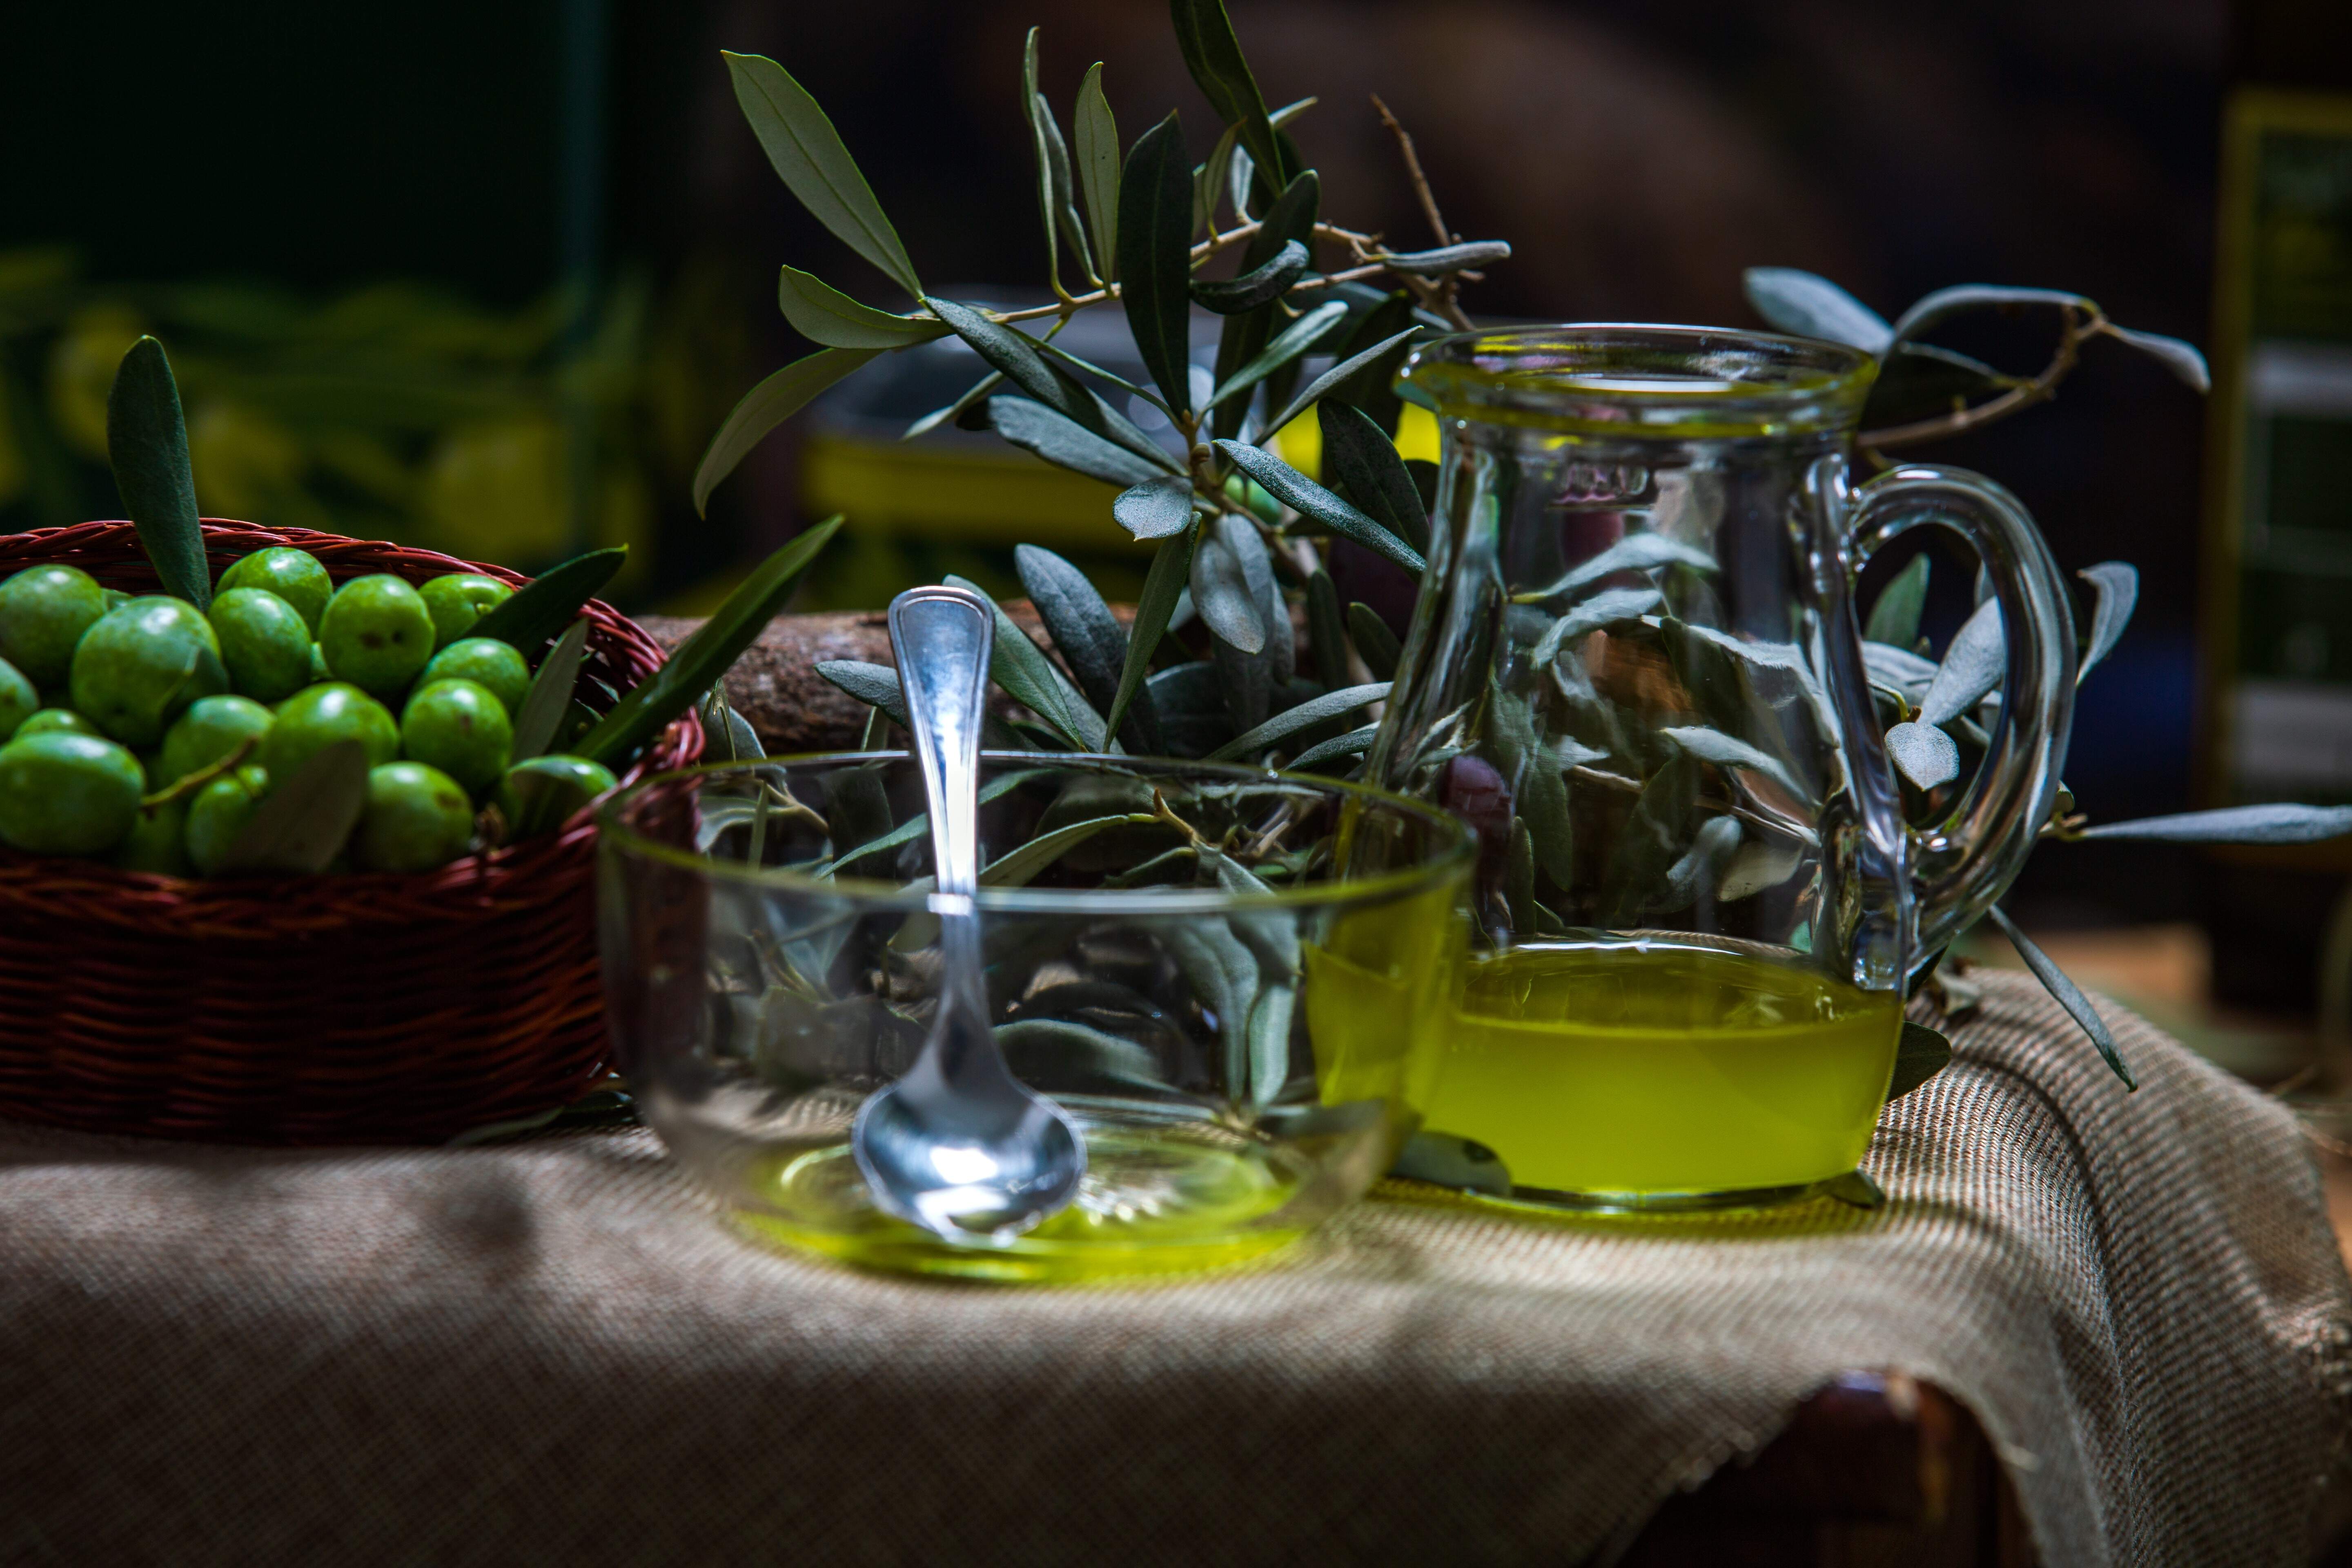 Technology, Tradition… and Olive Oil.